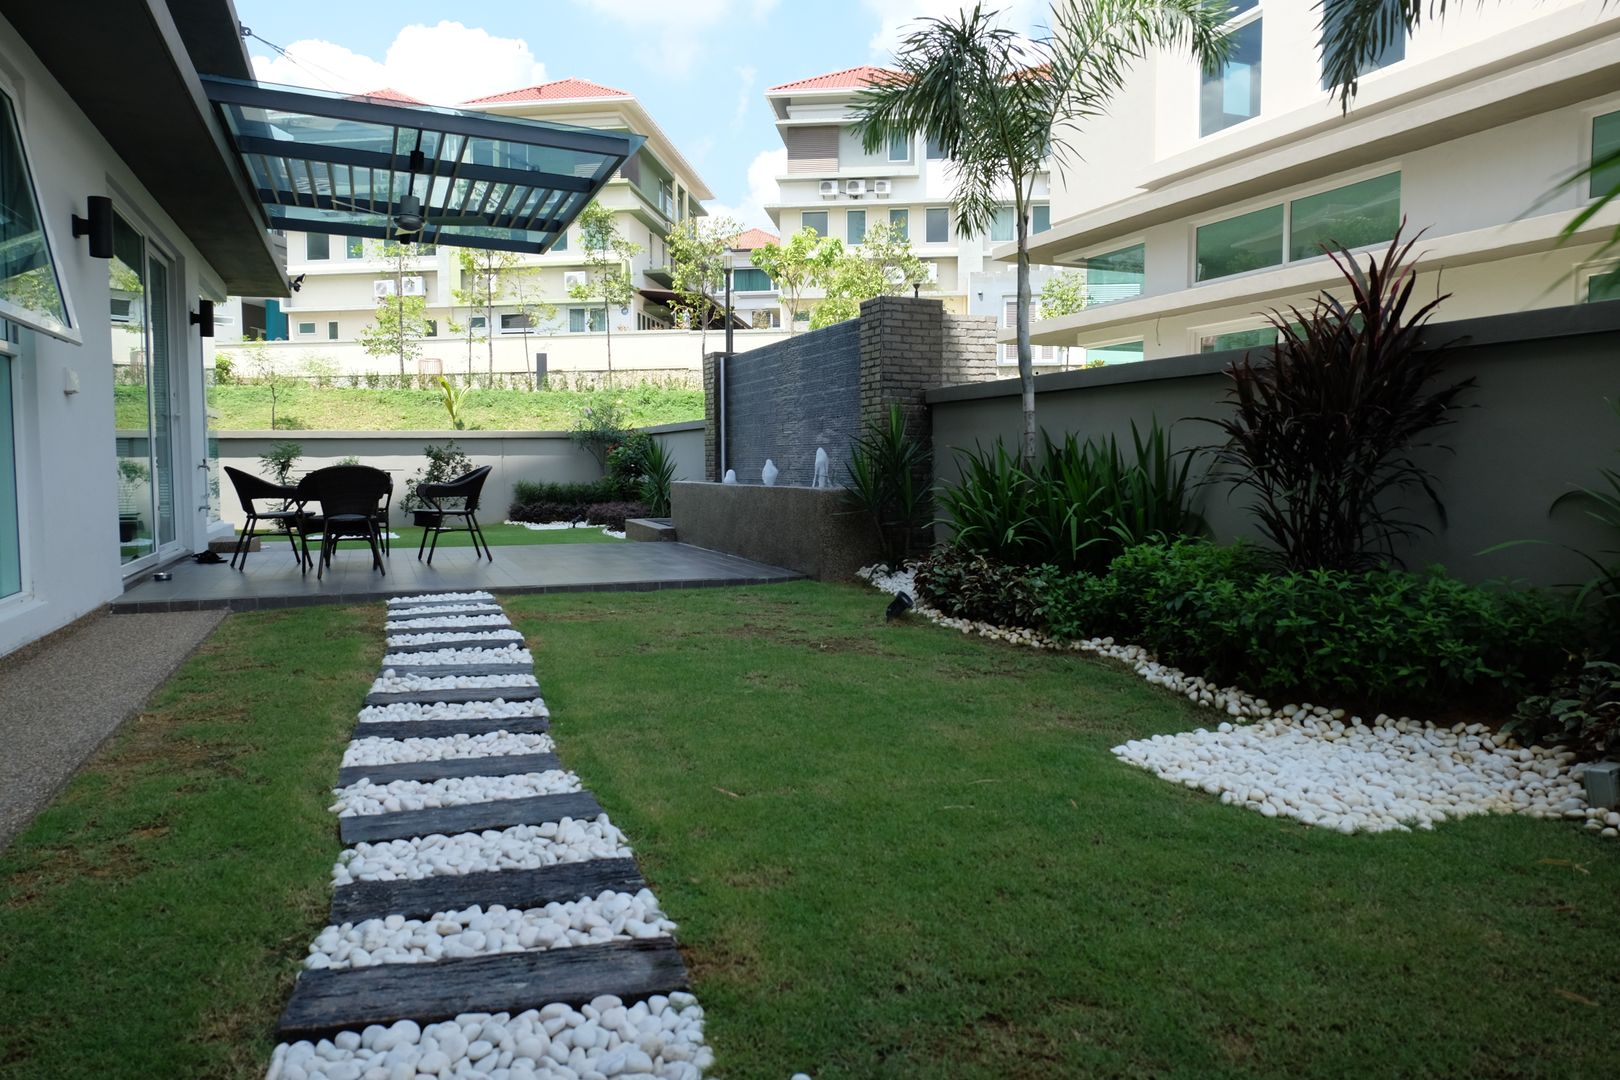 Contemporary Tropical , 3-Storey semi-D, inDfinity Design (M) SDN BHD inDfinity Design (M) SDN BHD Jardin tropical